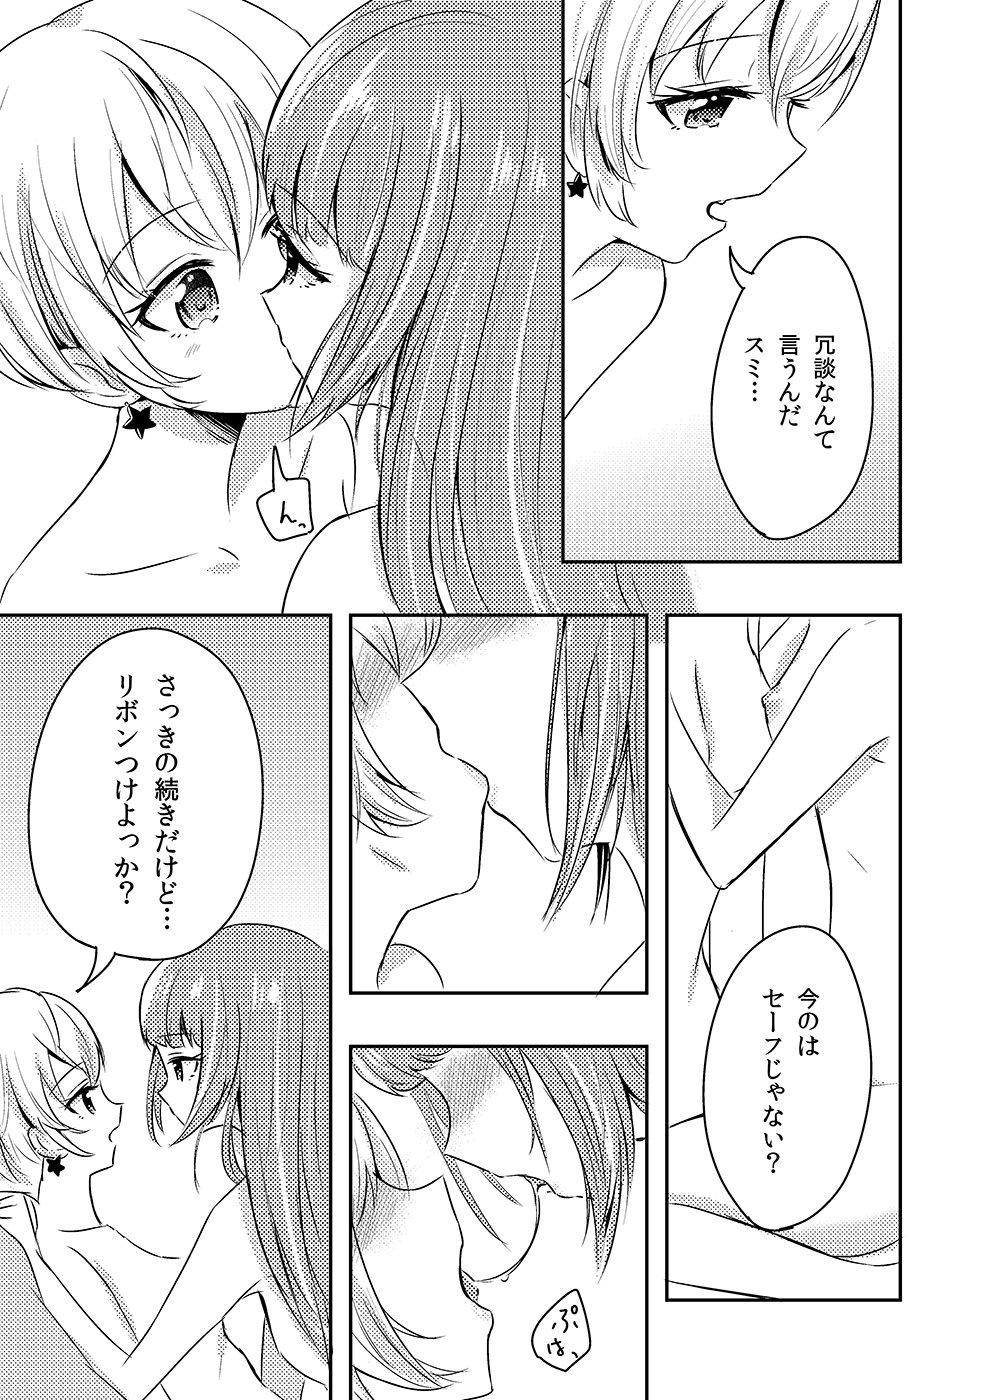 Large Who contributed to loveless sex joint two years ago! Yuusumi manga. - Aikatsu Whores - Picture 3